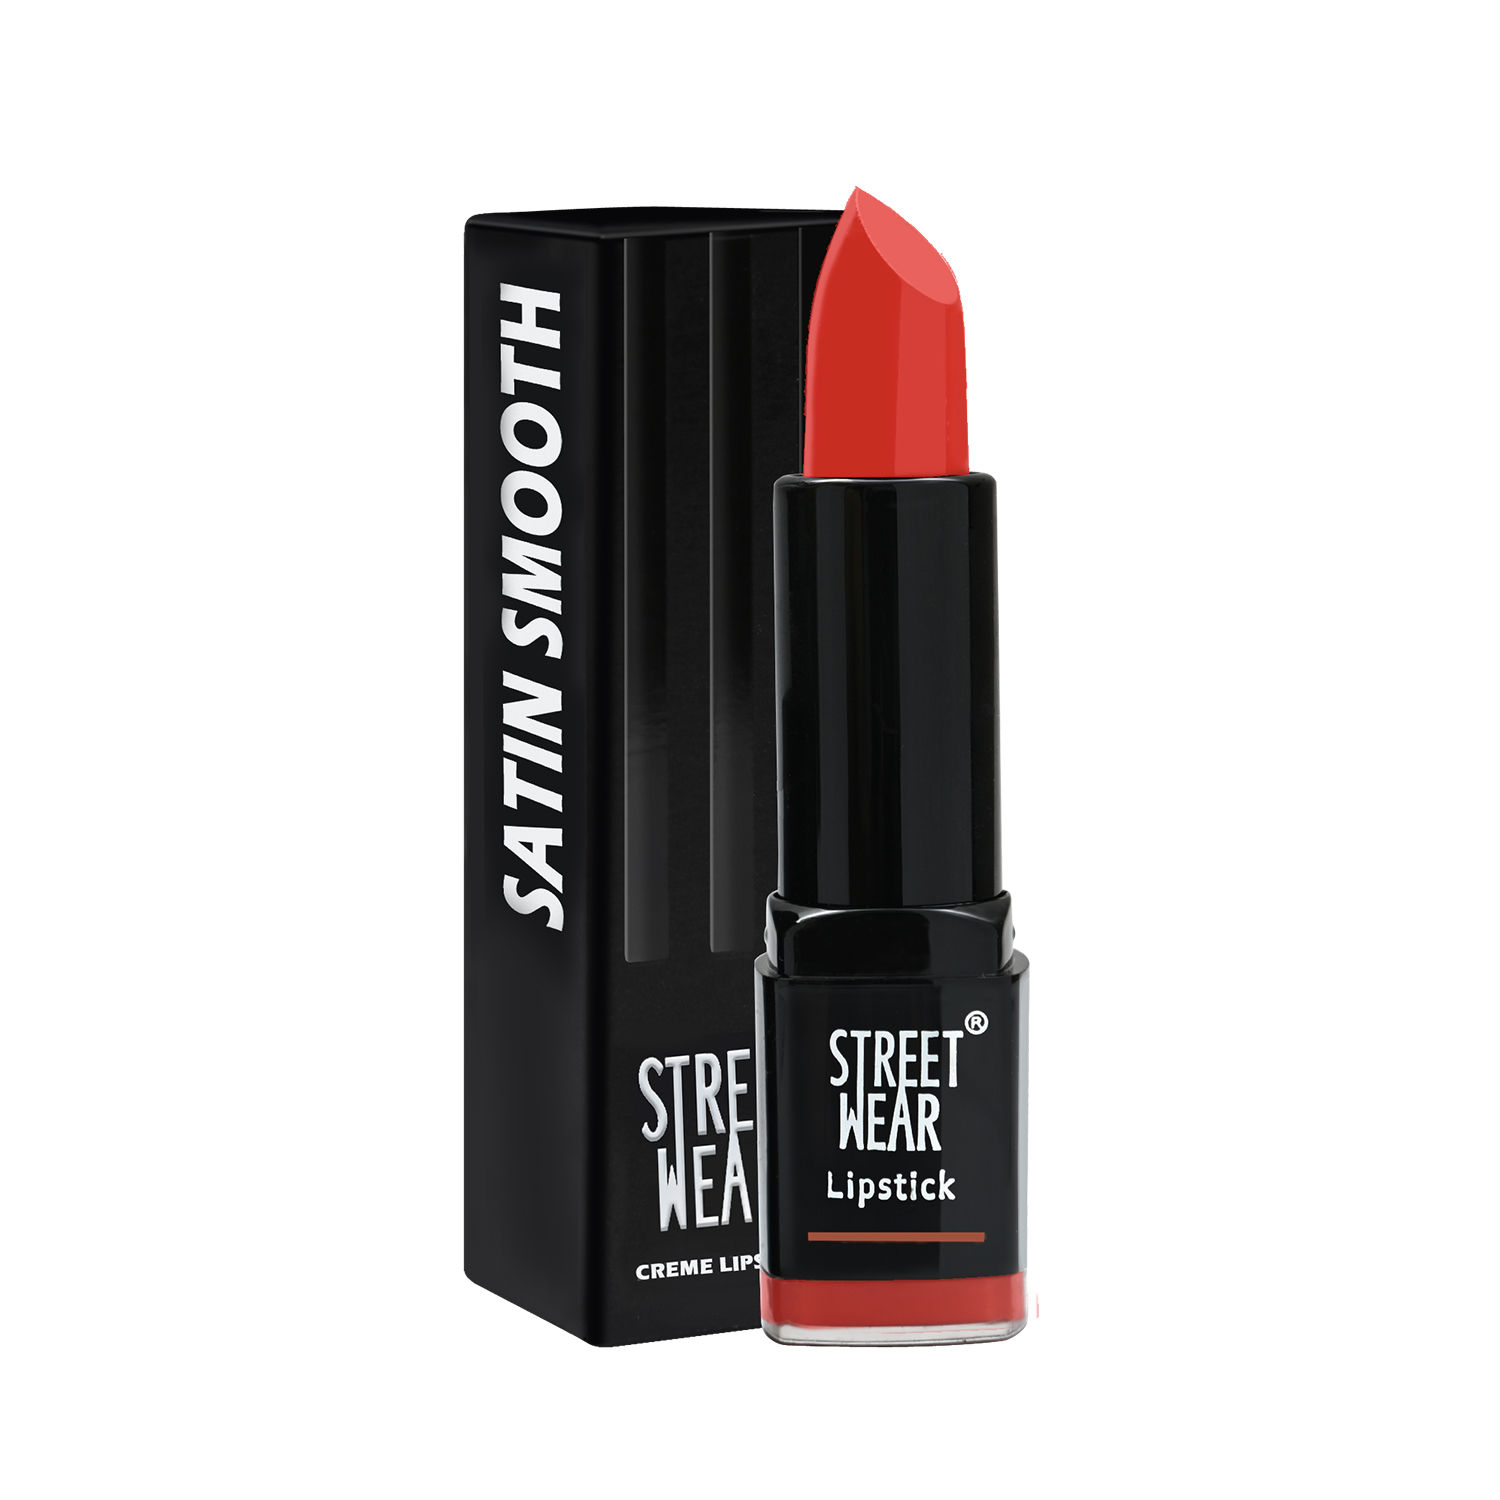 Buy STREET WEAR® Satin Smooth Lipstick -TANGERINE TOUCH (Orange) - 4.2 gms - Longwear Creme Lipstick, Moisturizing, Creamy Formuation, 100% Color payoff, Enriched with Aloe vera, Vitamin E and Shea Butter - Purplle